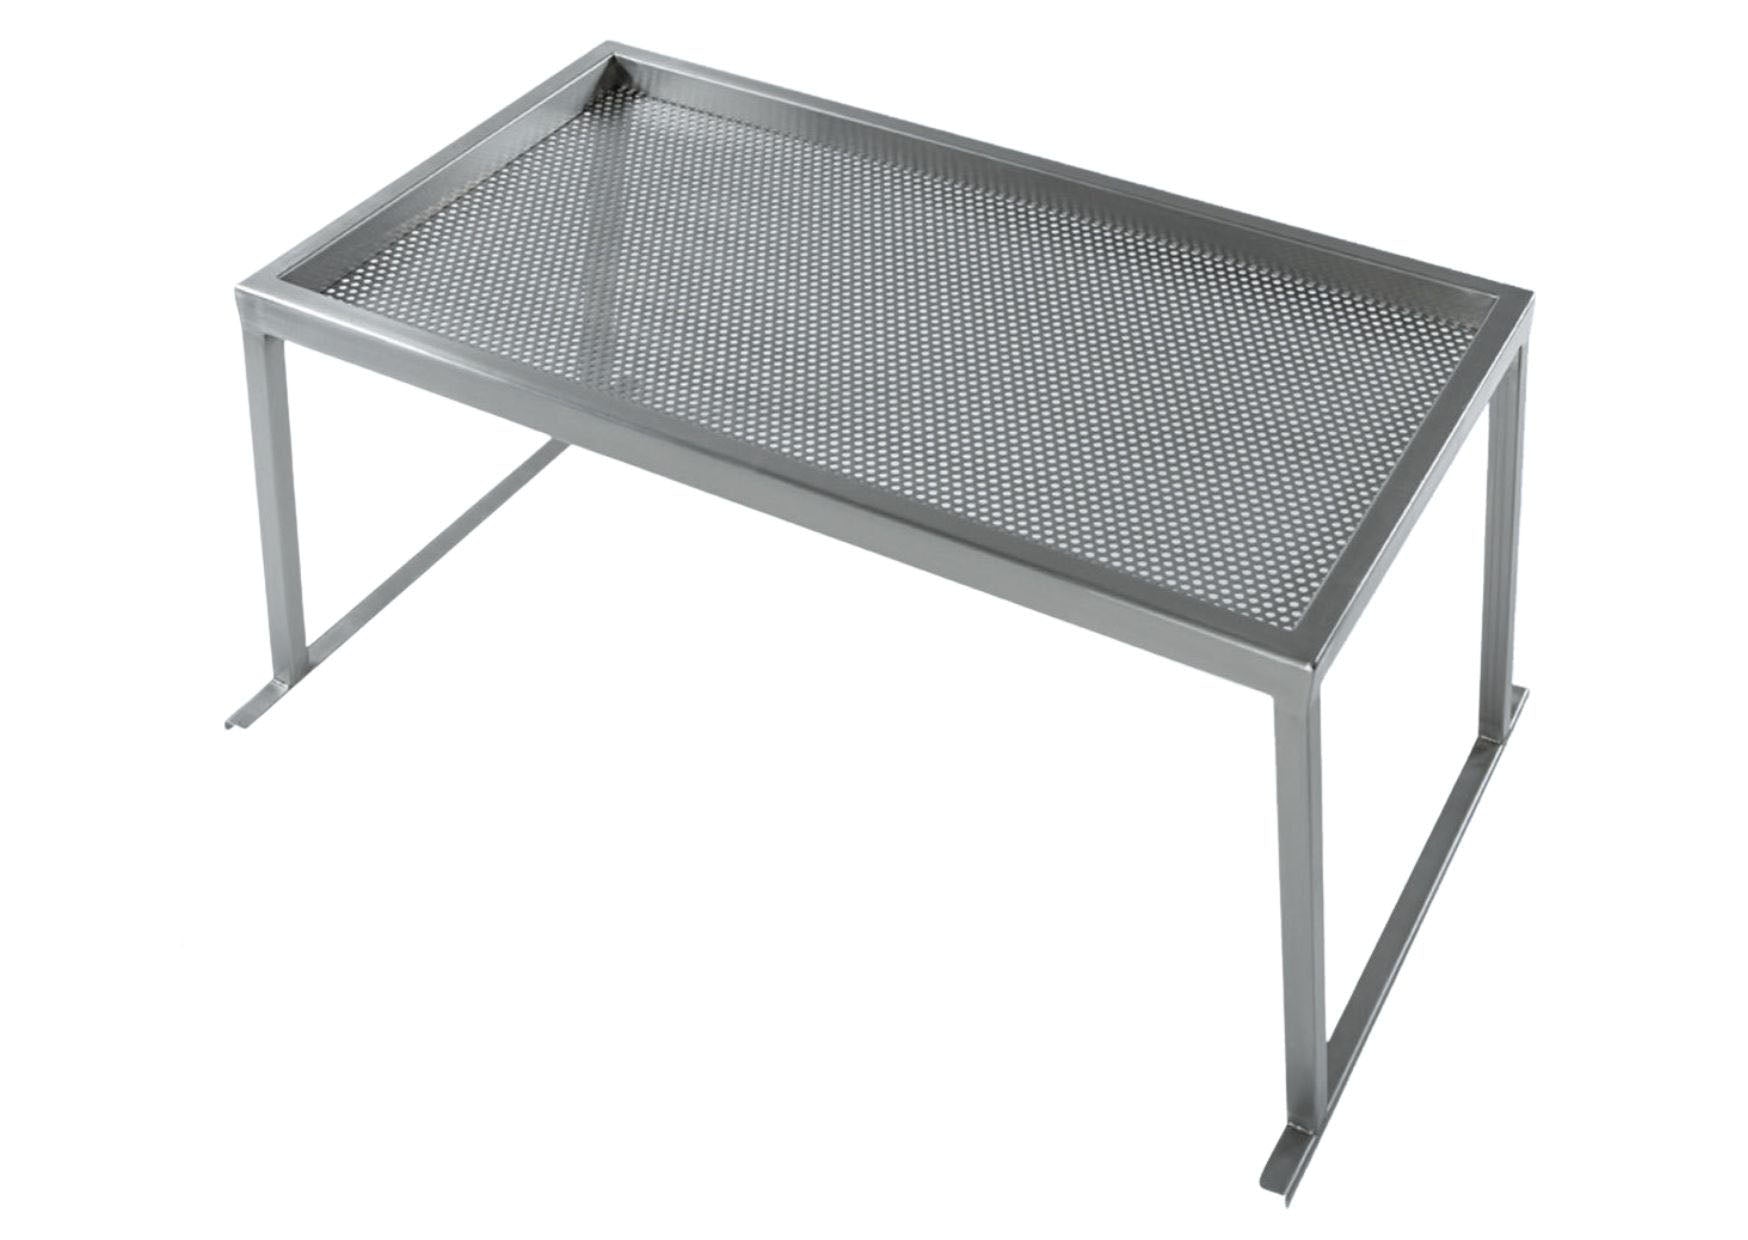 Perforated stainless steel shelf